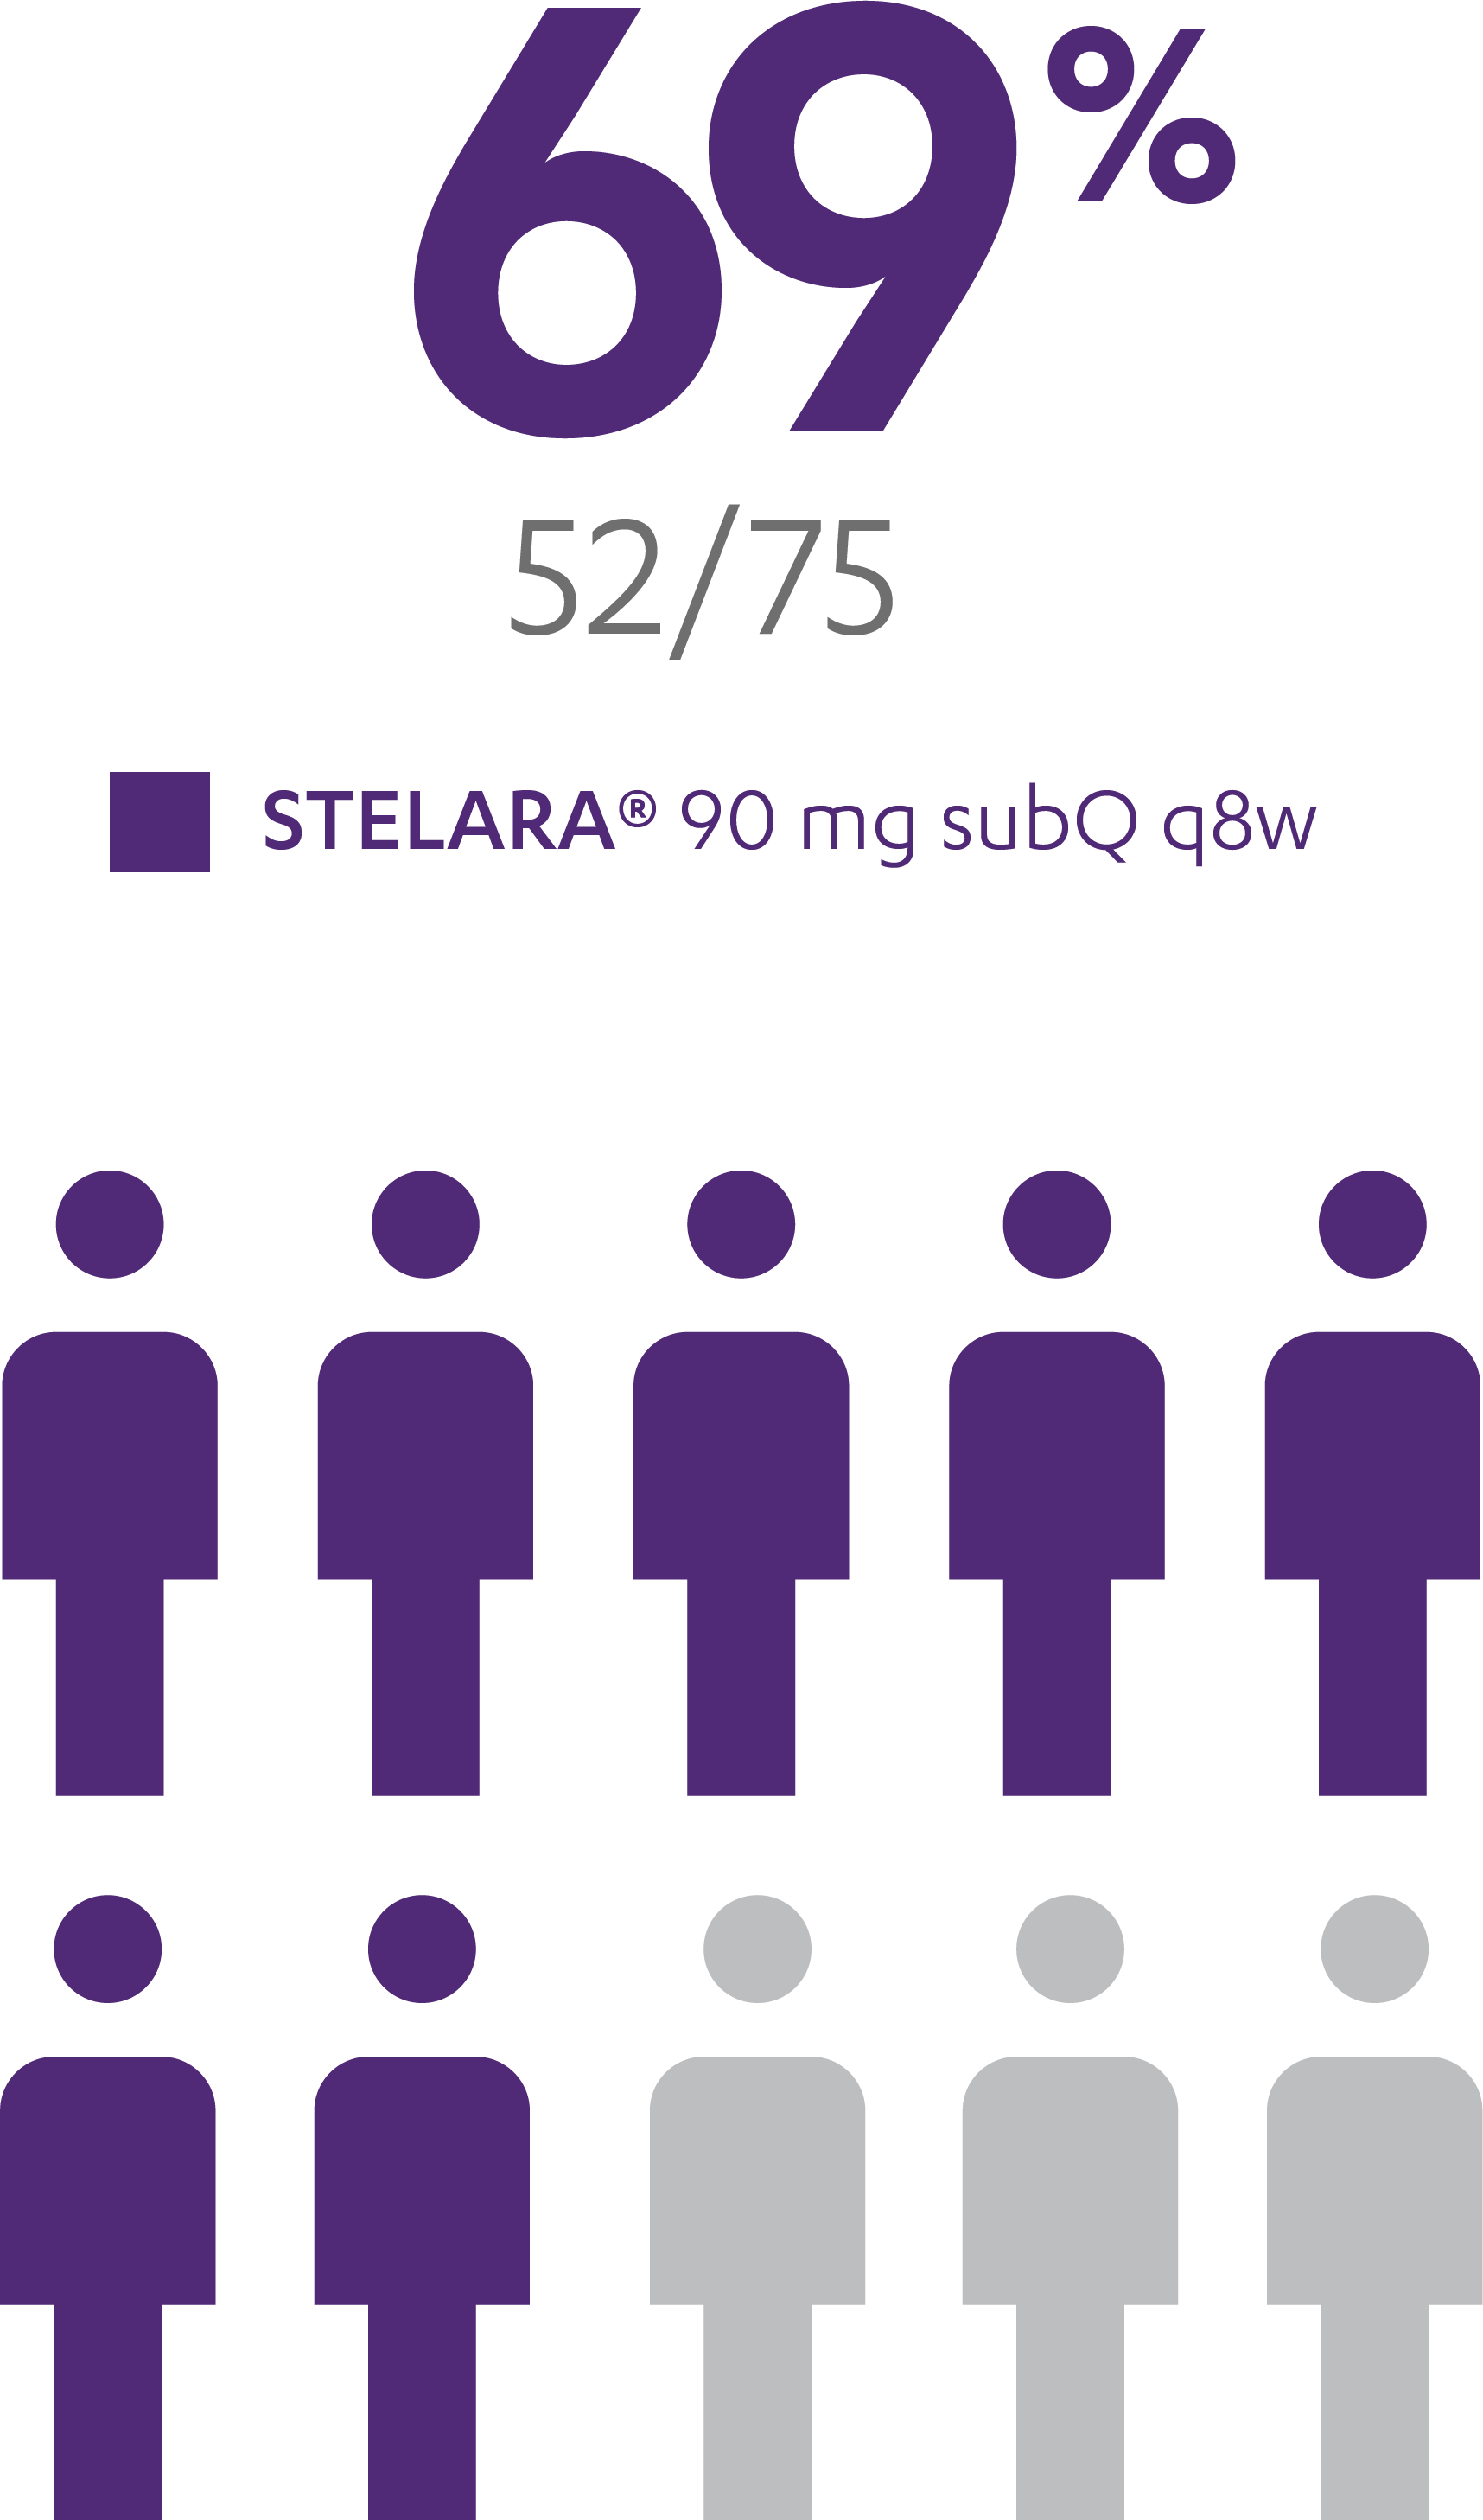 Infographic showing 69% (52/75) of patients who received STELARA® subcutaneous every 8 weeks maintained symptomatic remission